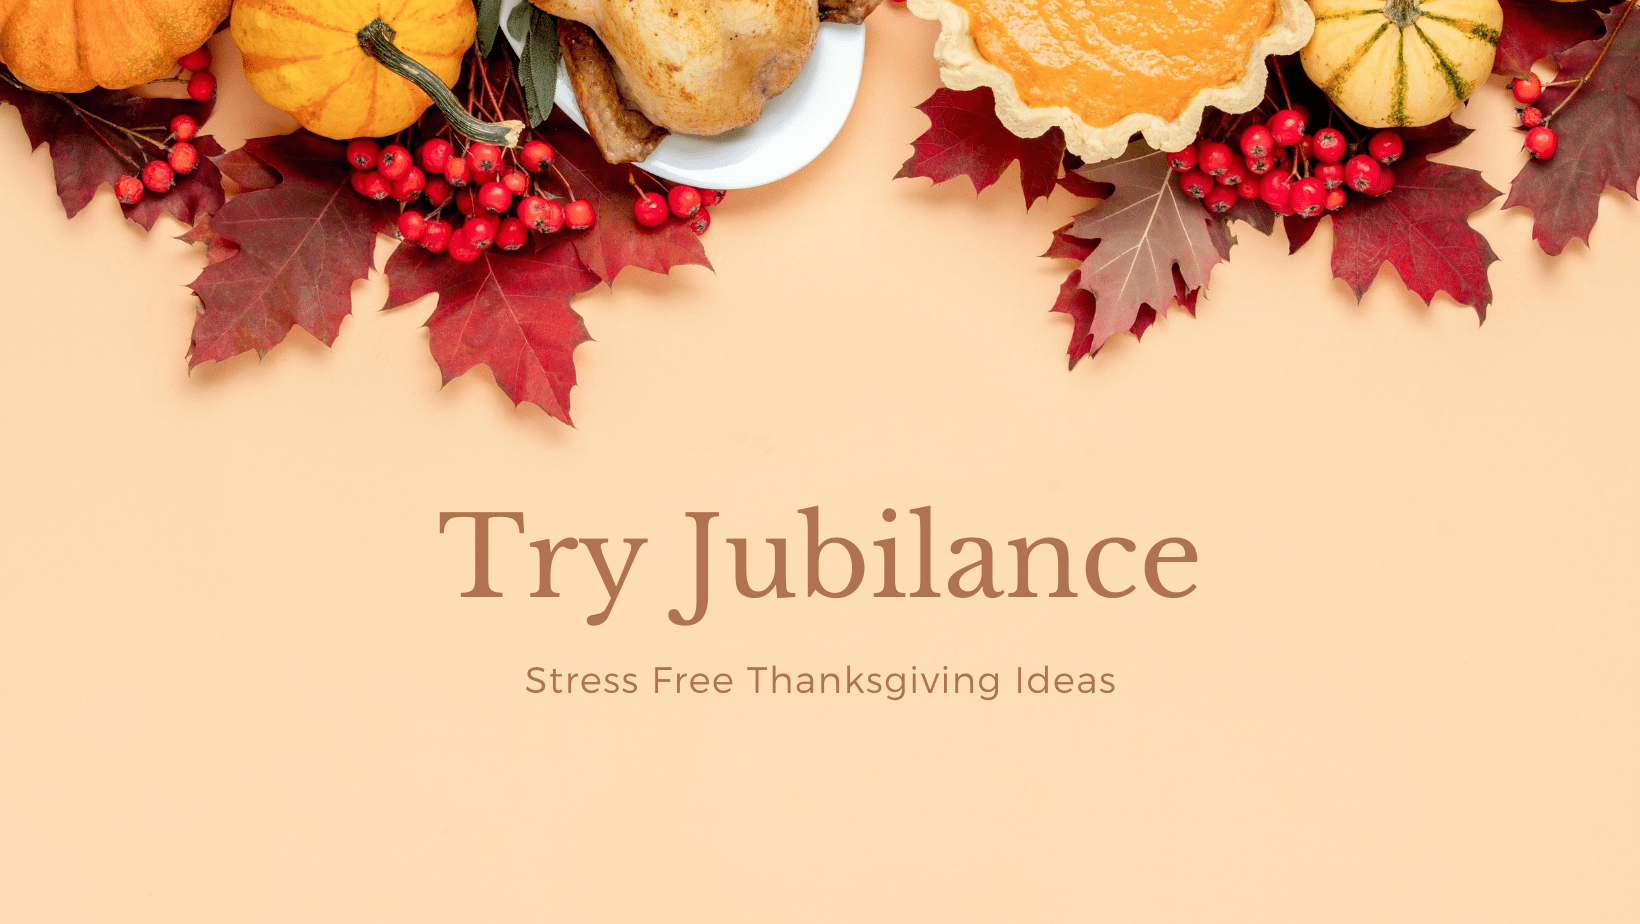 If you need some extra help try Jubilance at the Thanksgiving dinner table.